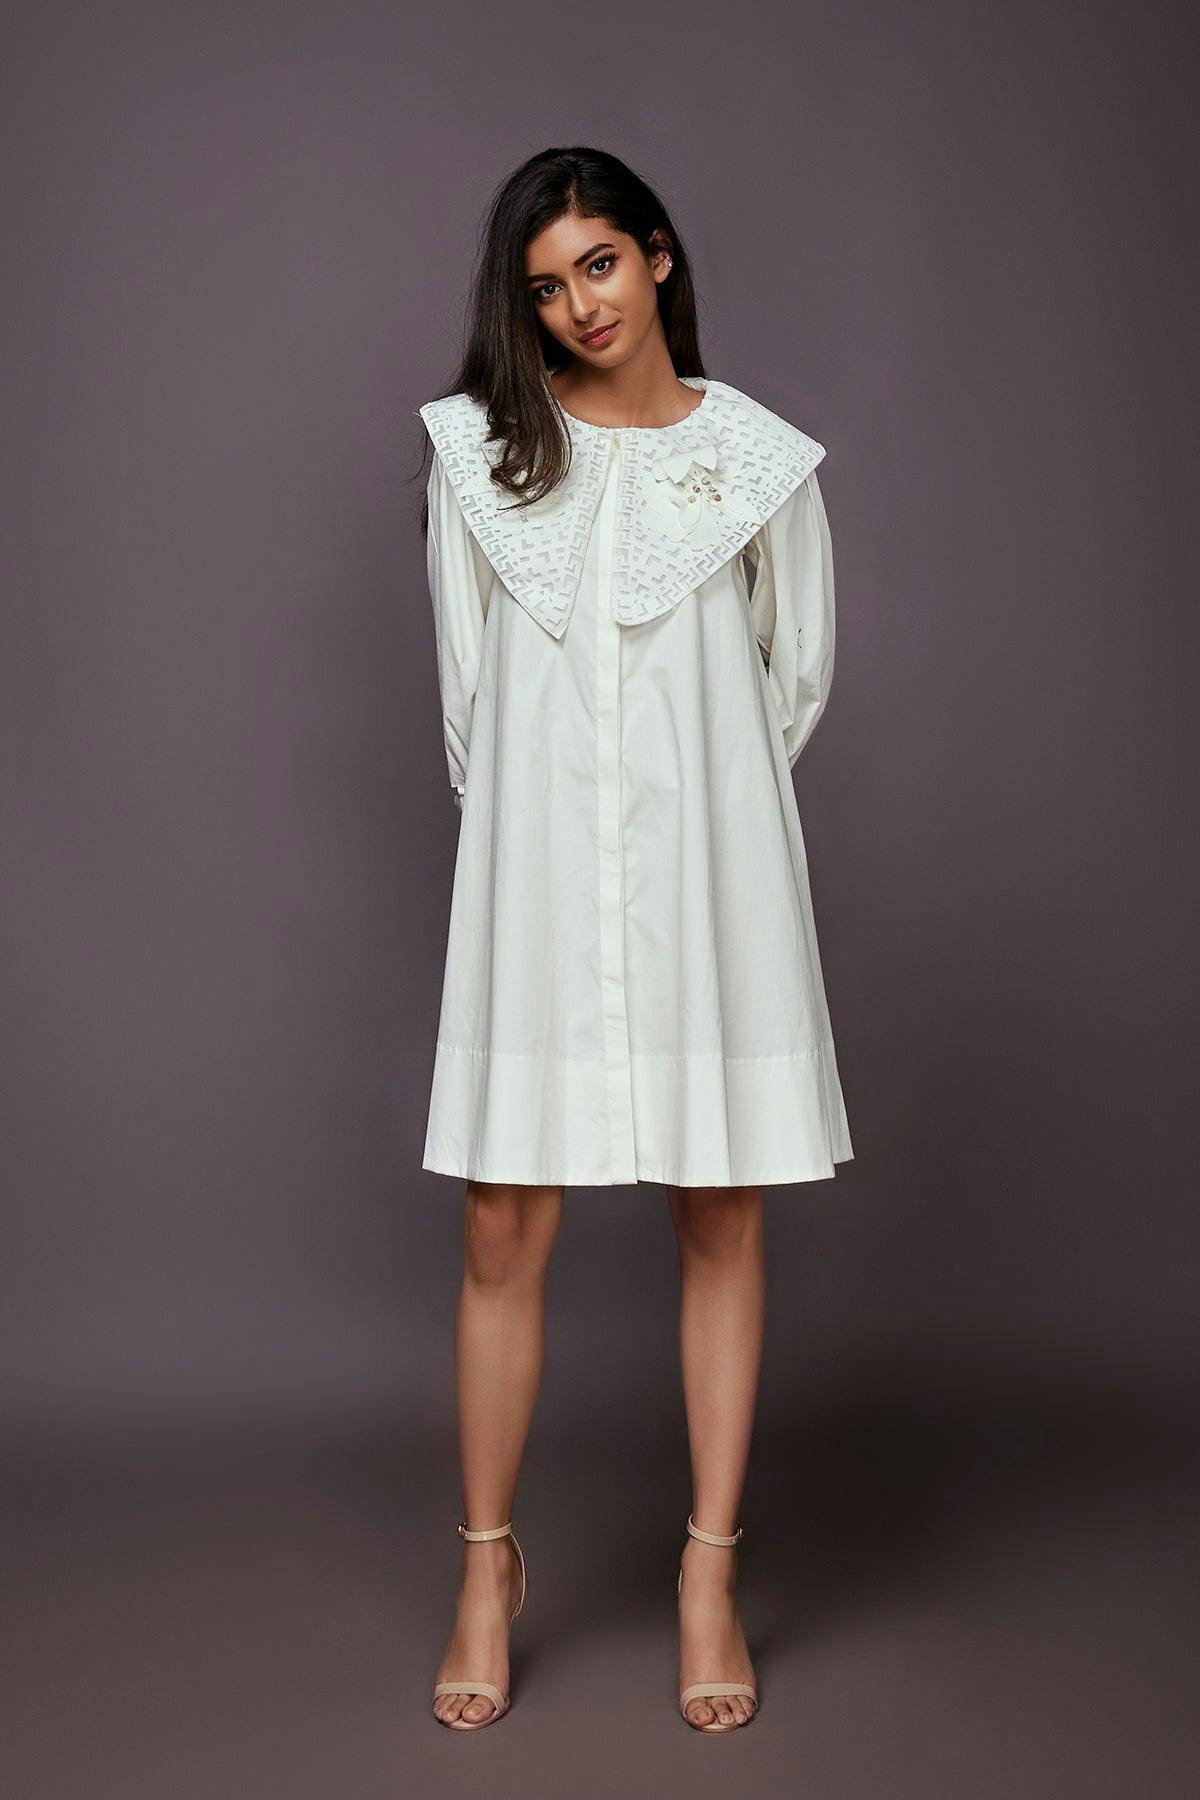 NN-1128-W ::: White A-Line Cotton Dress With Cutwork Collar, a product by Deepika Arora